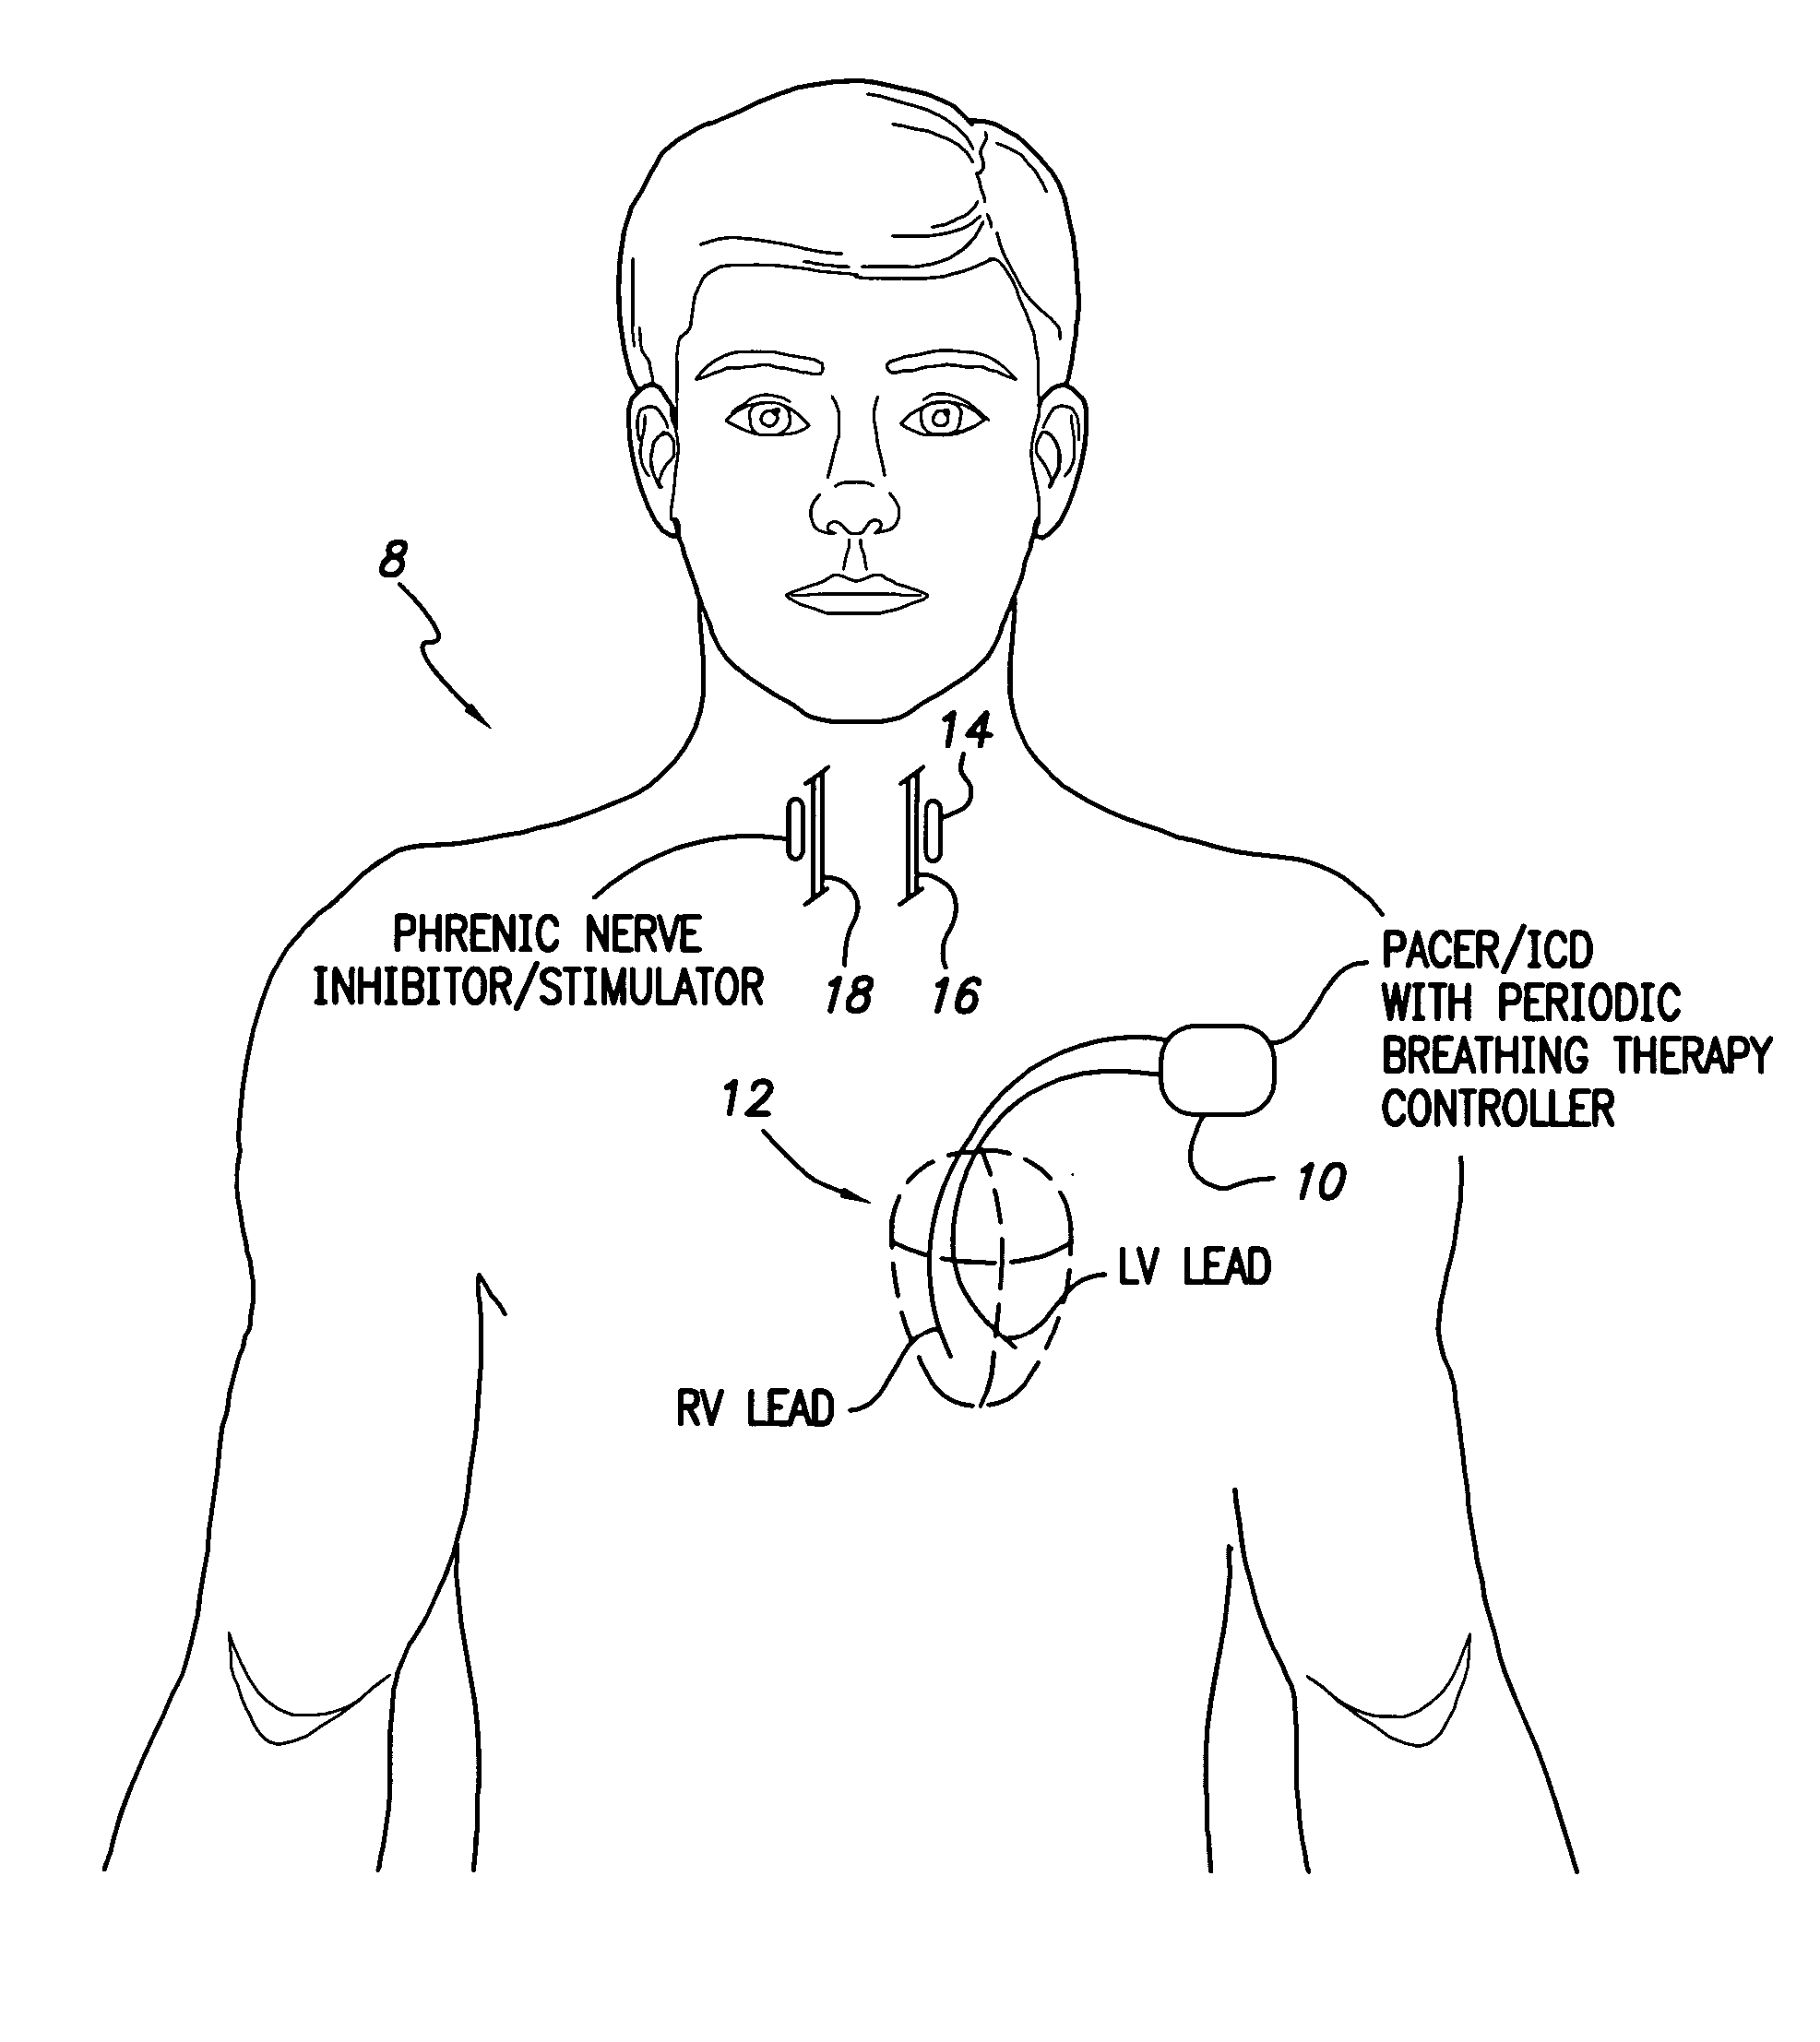 System and method for applying therapy during hyperpnea phase of periodic breathing using an implantable medical device